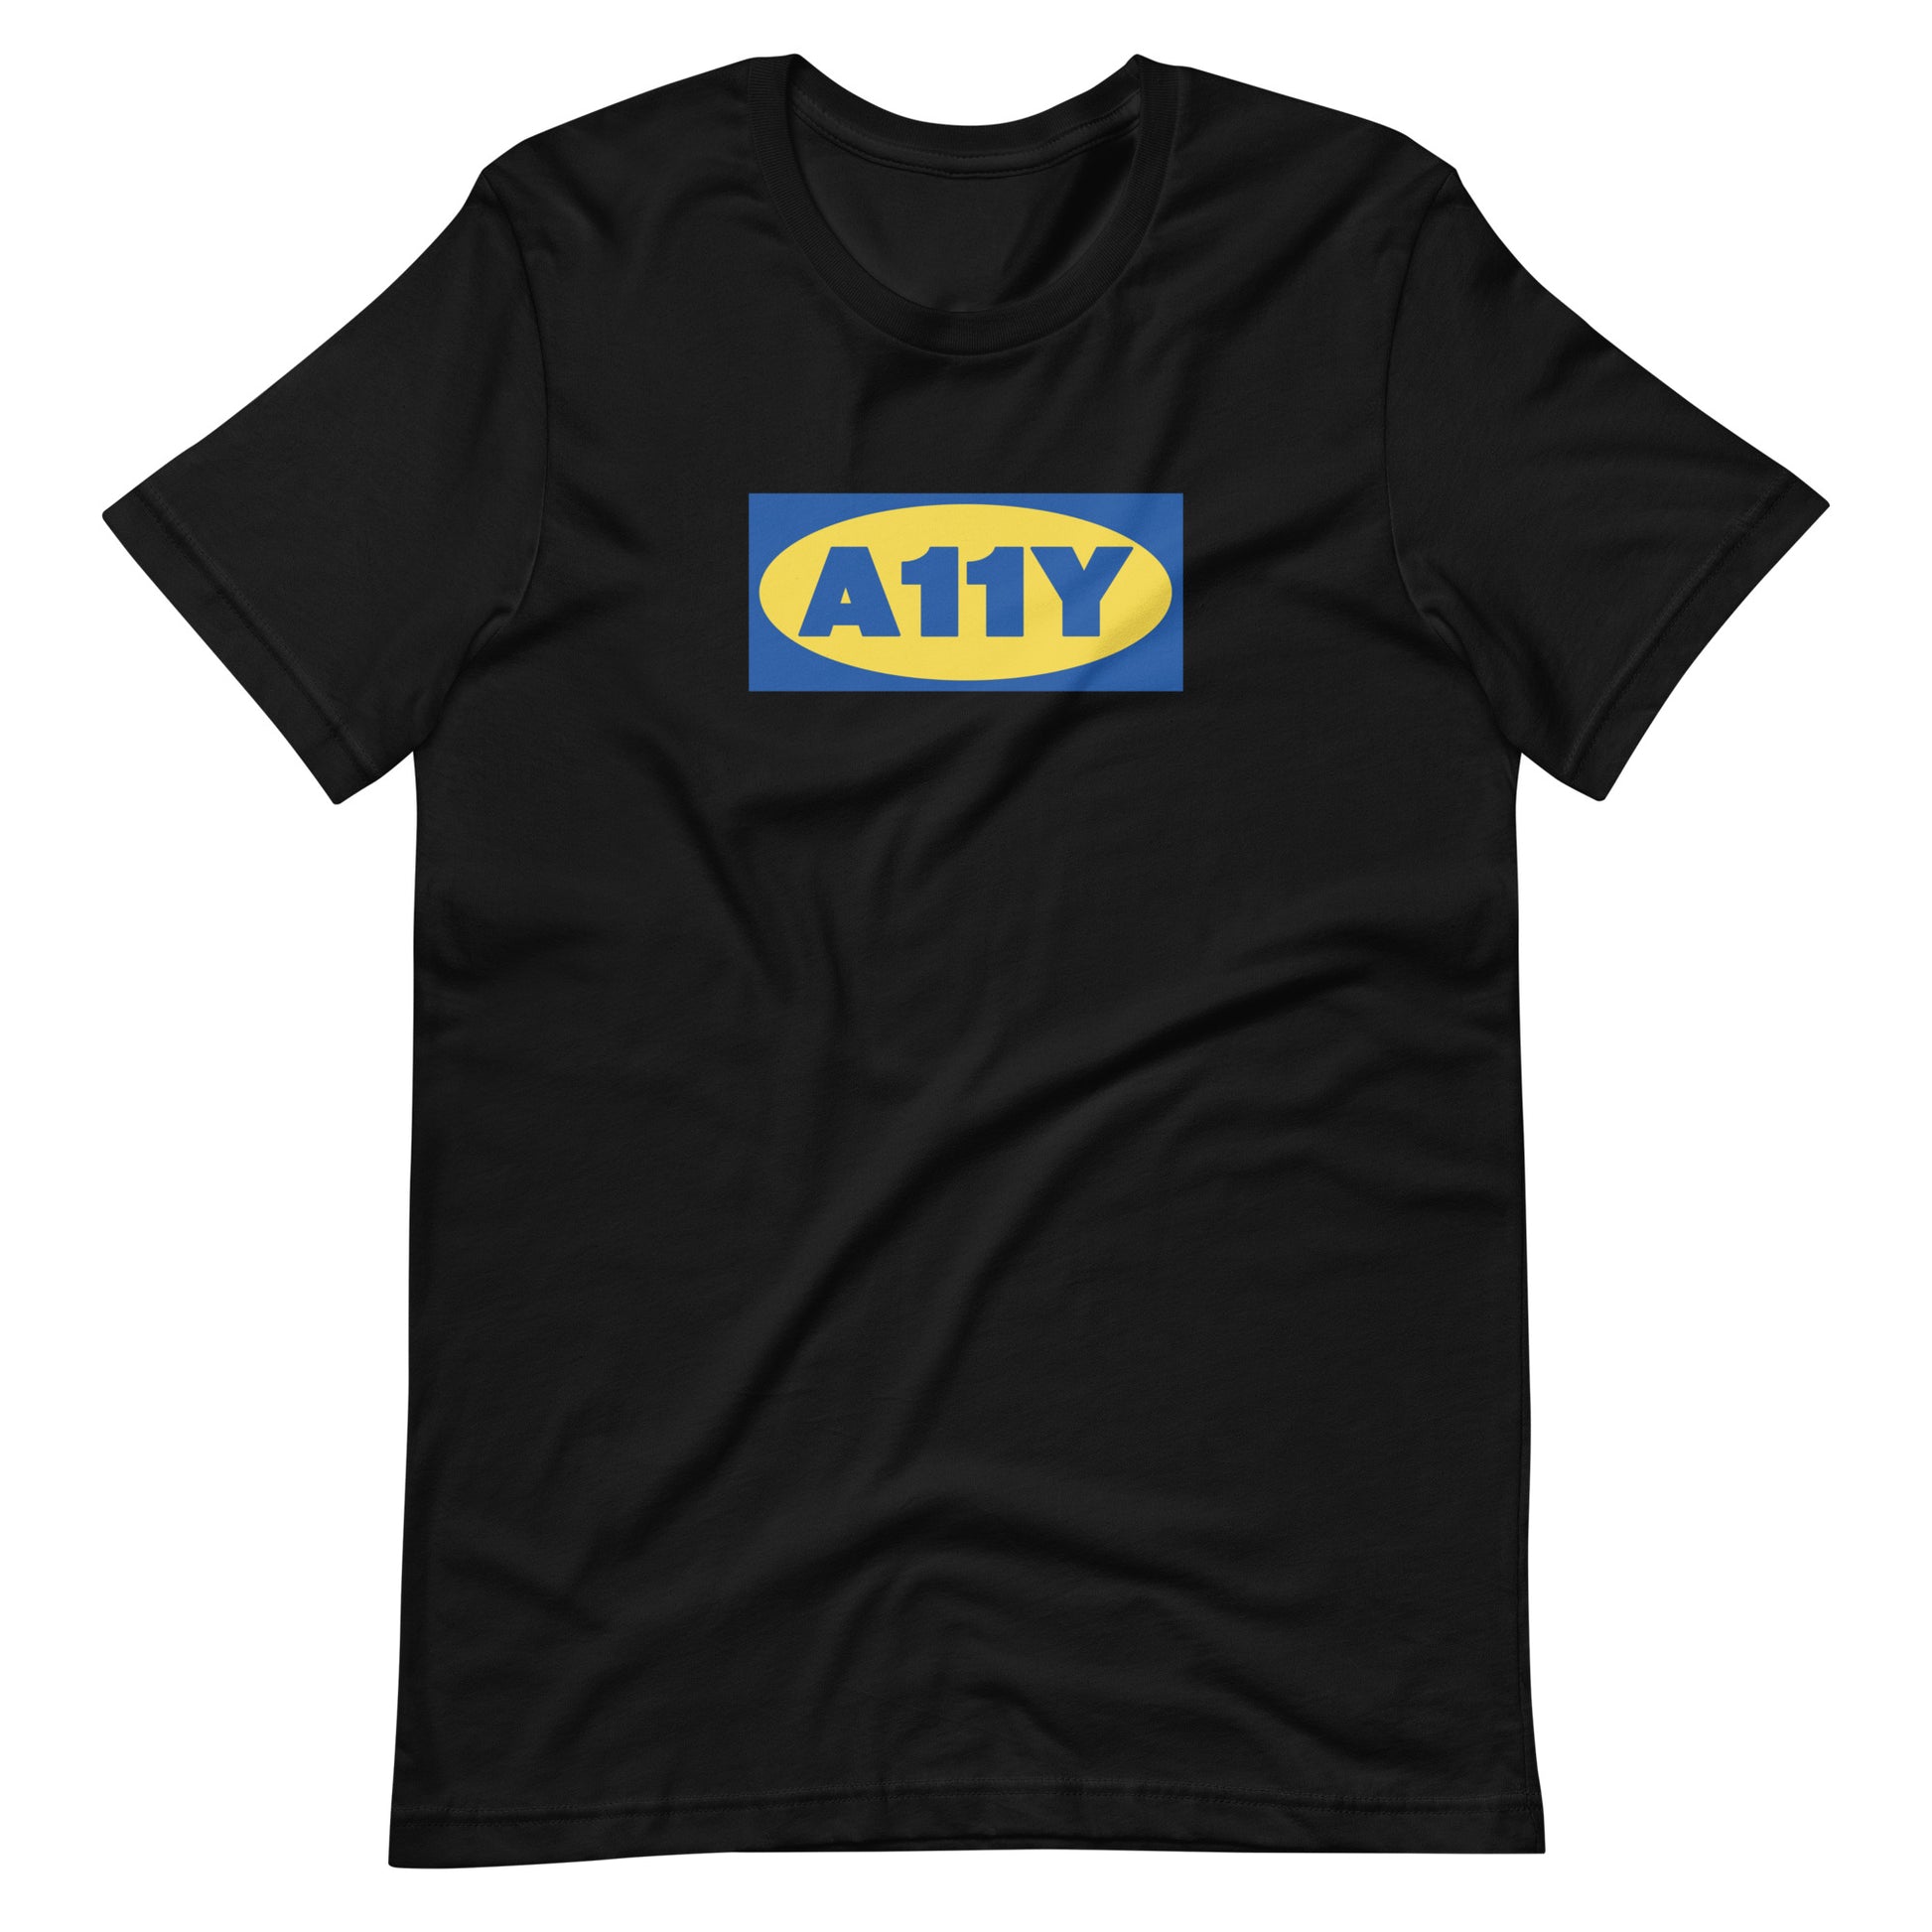 Thick blue A11y letters, on top of a yellow oval, on top of a blue rectangle. Remicent of the Ikea logo. Center aligned on front of a black t-shirt.